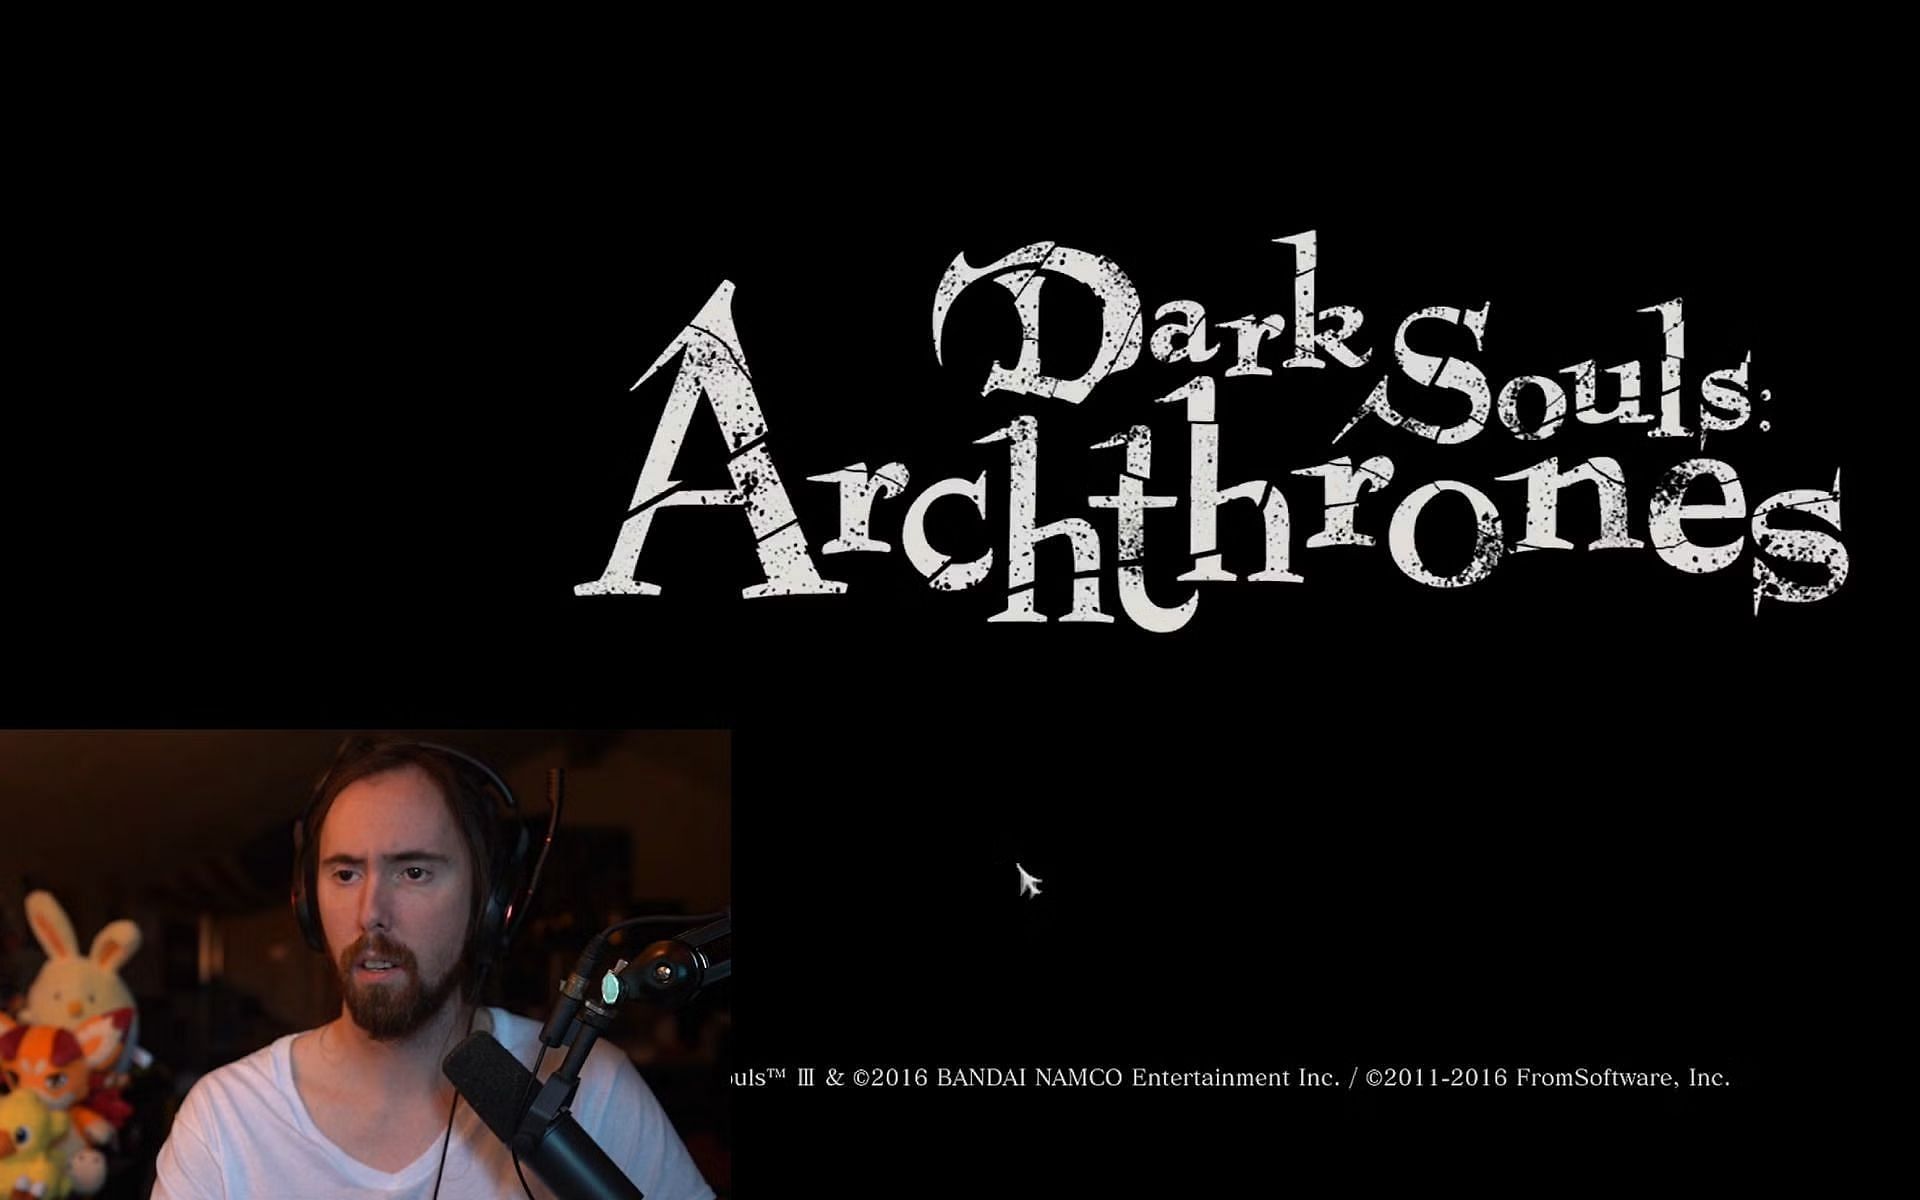 Asmongold seems very impressed by Dark Souls: Archthrones (Image via Zackrawrr/Twitch)